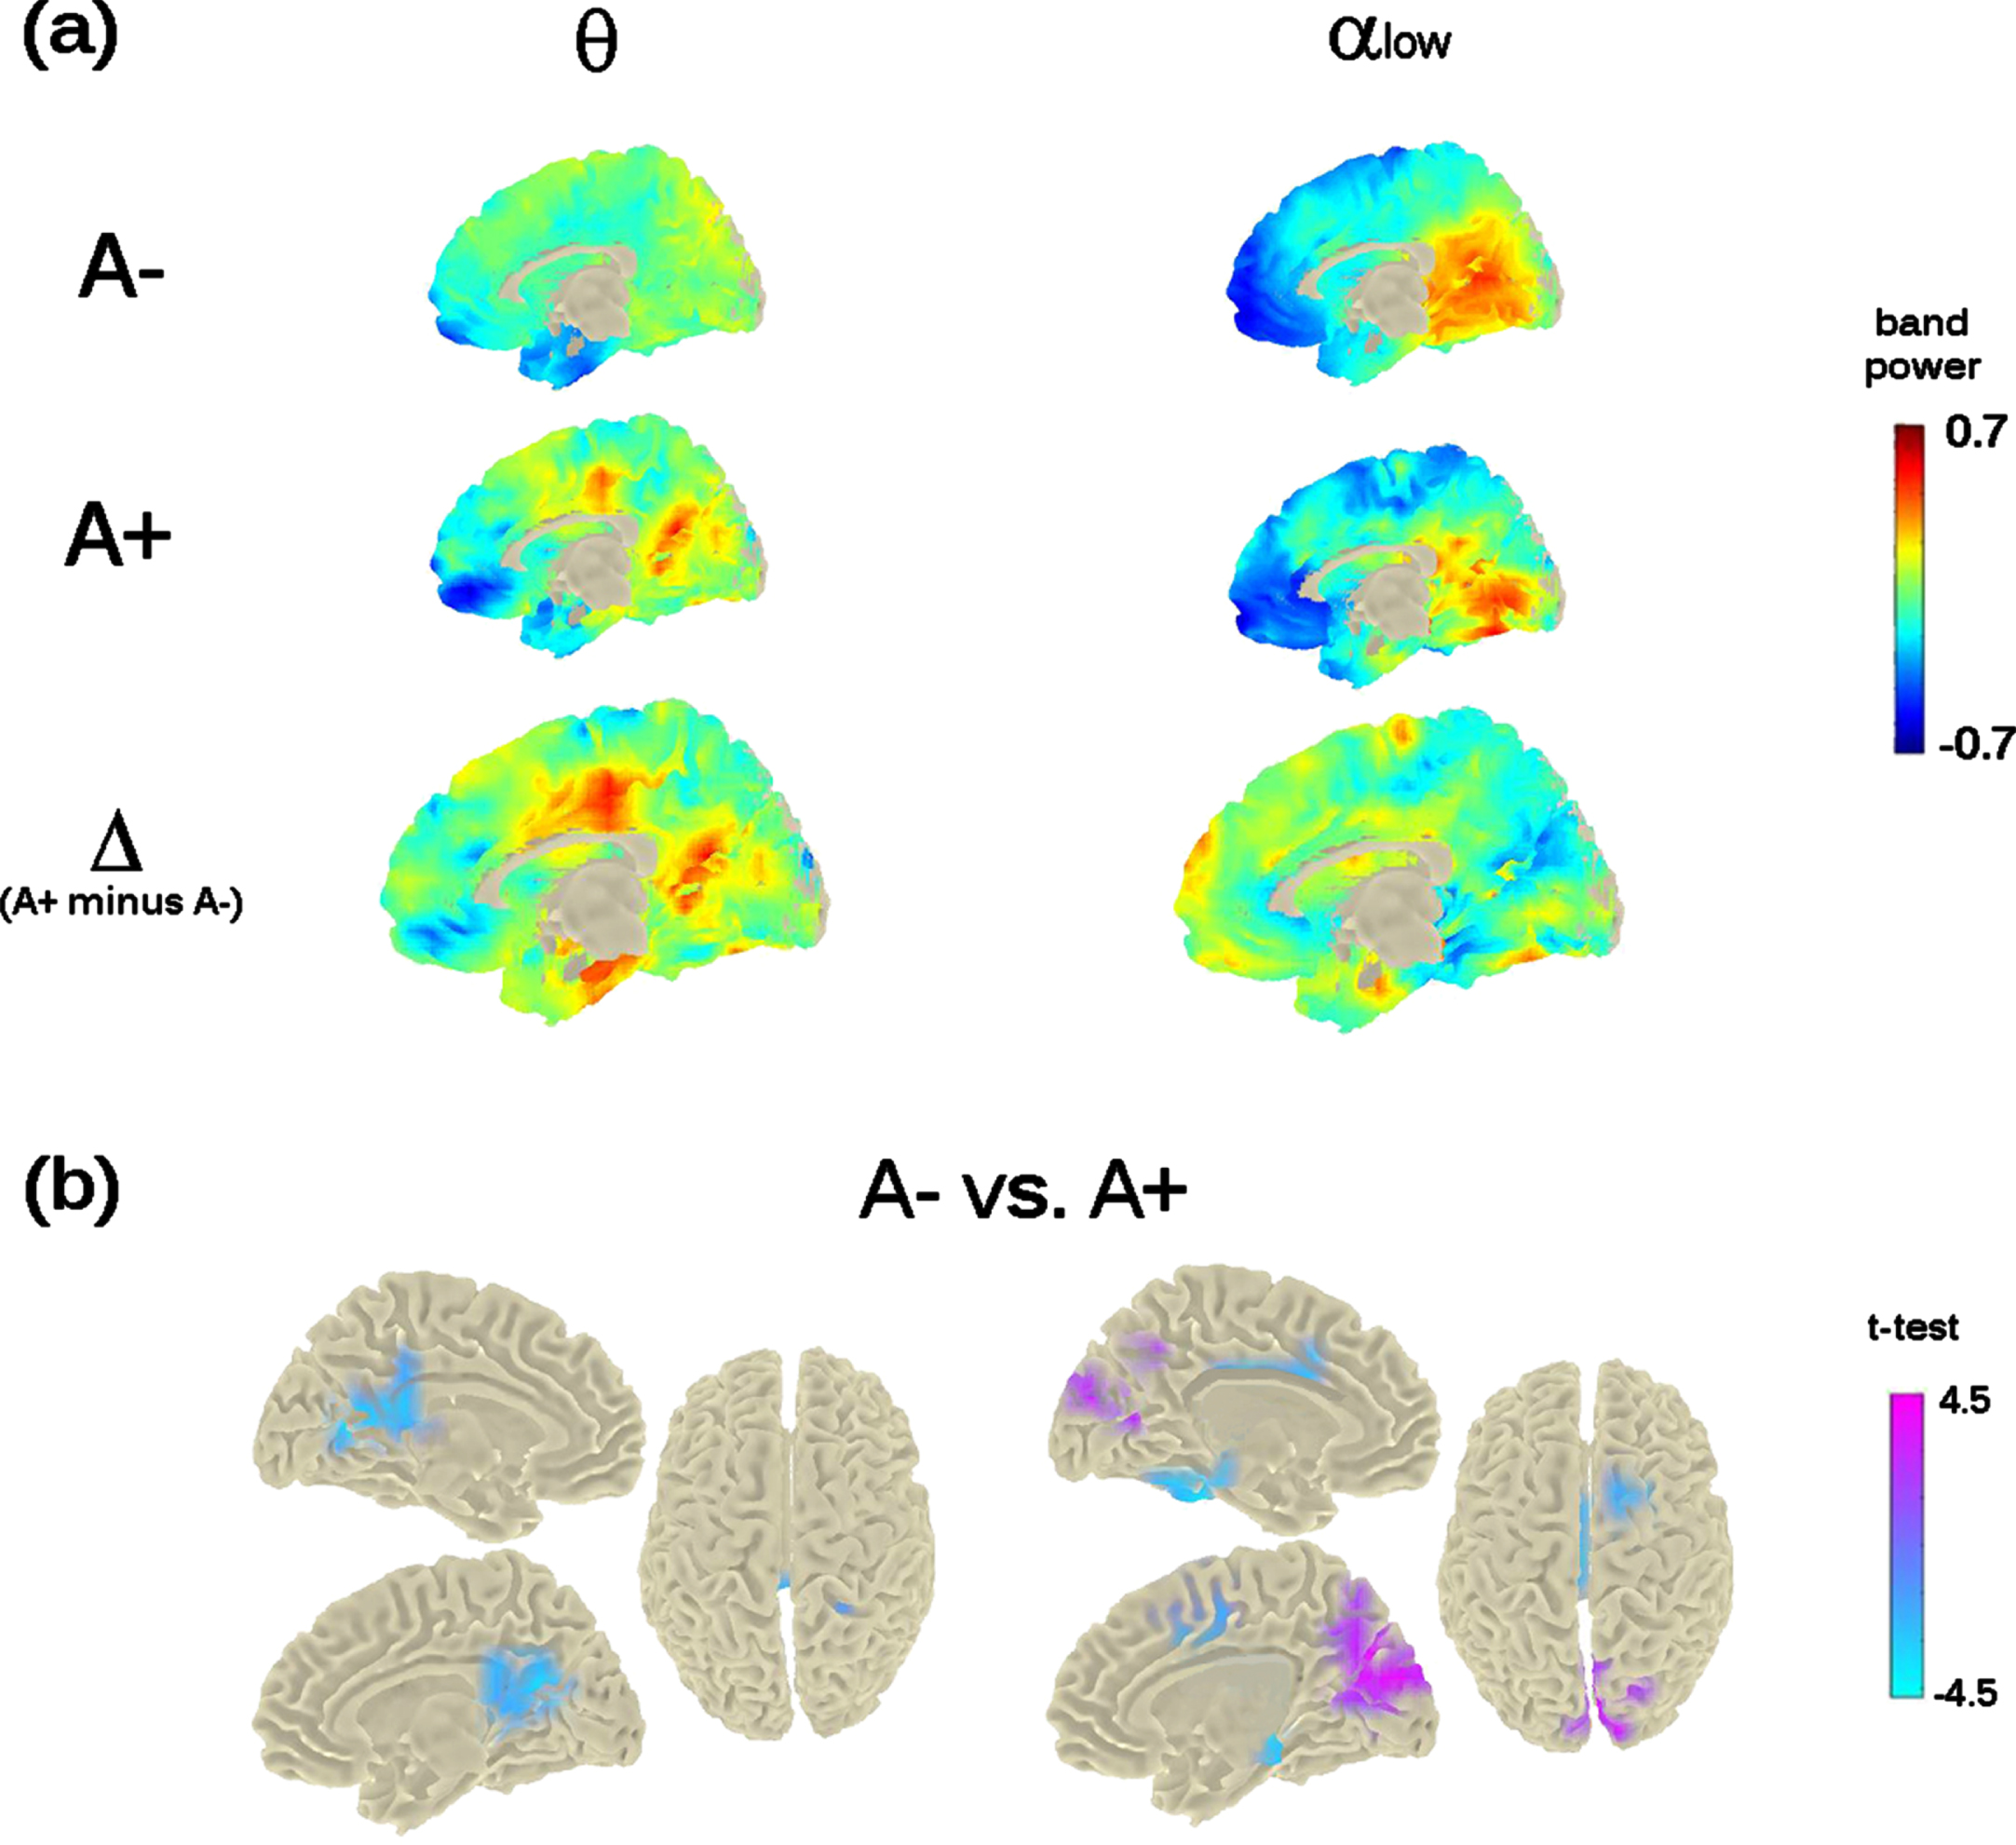 Theta- and Alpha-low band power distribution on the brain surface at the time of the second visit (i.e., M24). Panel (a) depicts the grand-mean across the whole sample for A– and A+ as well as the difference between A+ and A–. Power-values are expressed in z-scored as for M0. Panel (b) shows the independent-samples t-test computed between A– and A+. Negative t-test (in cyan) reflects ampler band-power for A+ with respect to A–; positive t-test (in magenta) reflects lower band-power for A+ with respect to A–. Importantly, significant probabilities are cluster-corrected for theta-band (left-column) and not at all corrected for alpha-low (right-column).